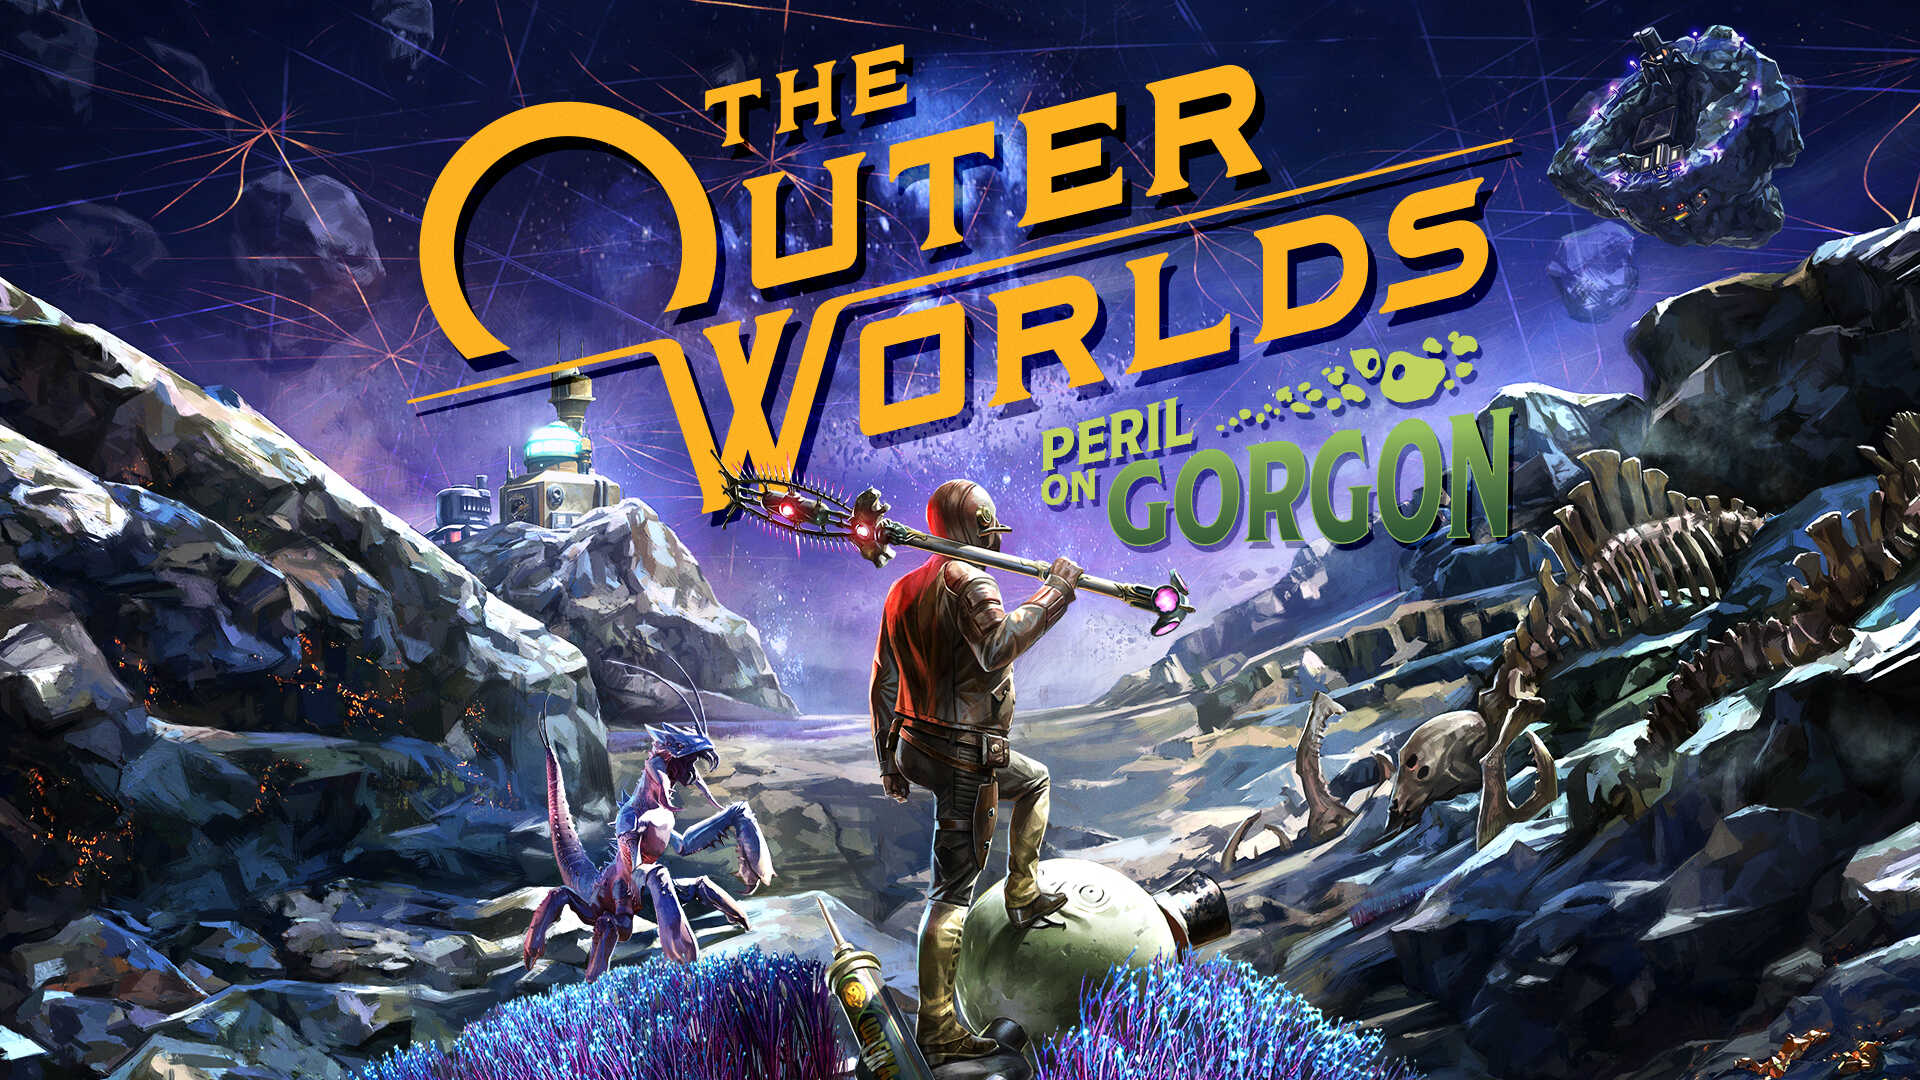 the outer worlds spacers choice edition price